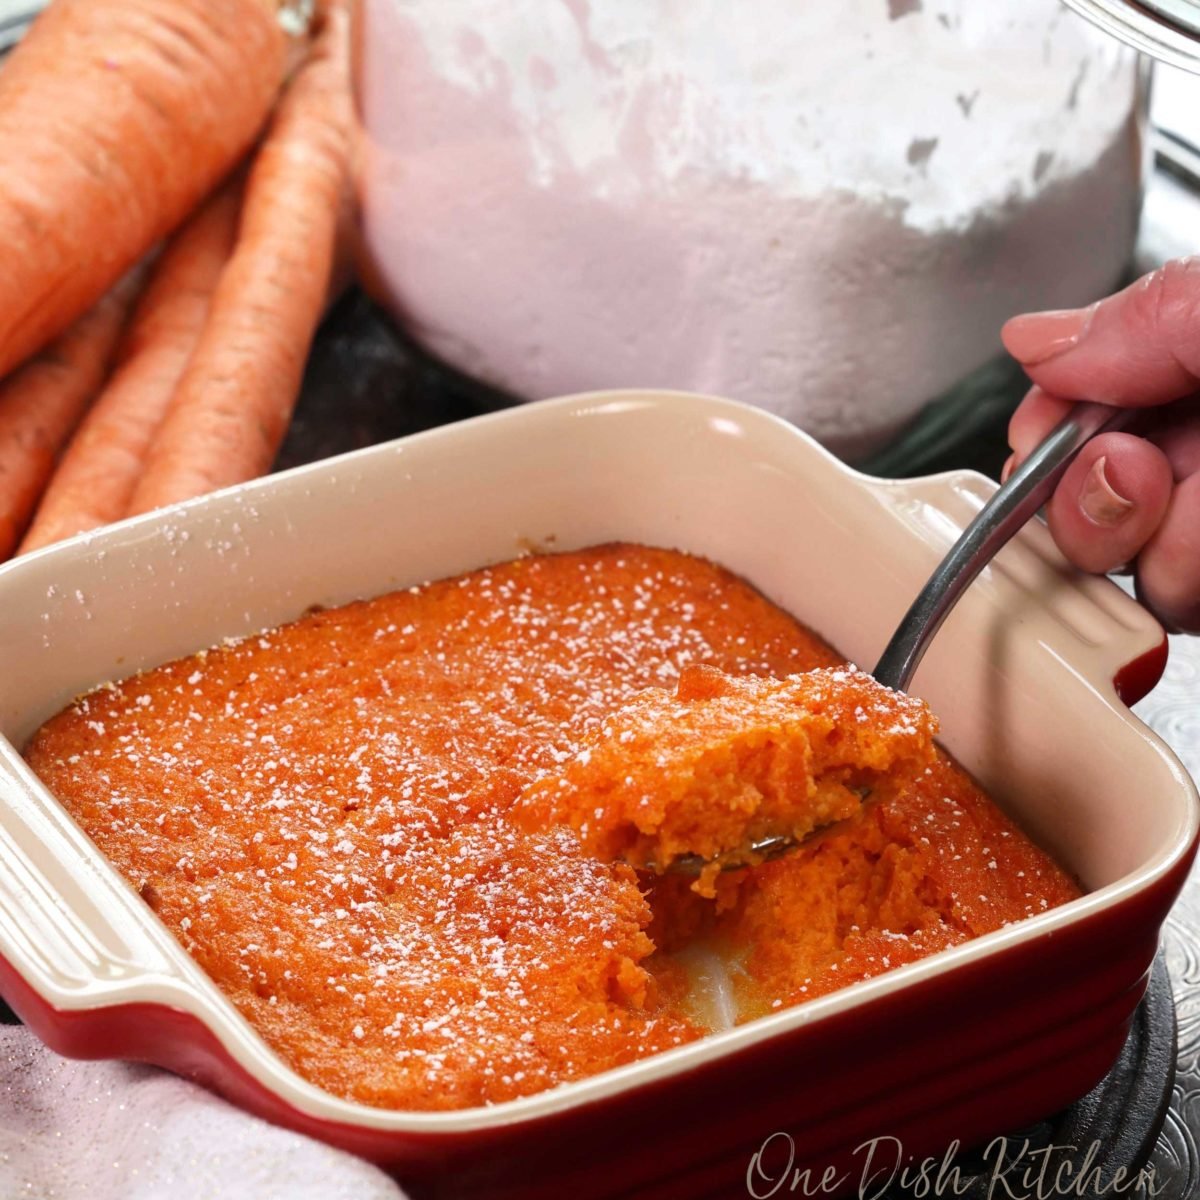 a spoonful of carrot souffle held above the baking dish containing the remainder.